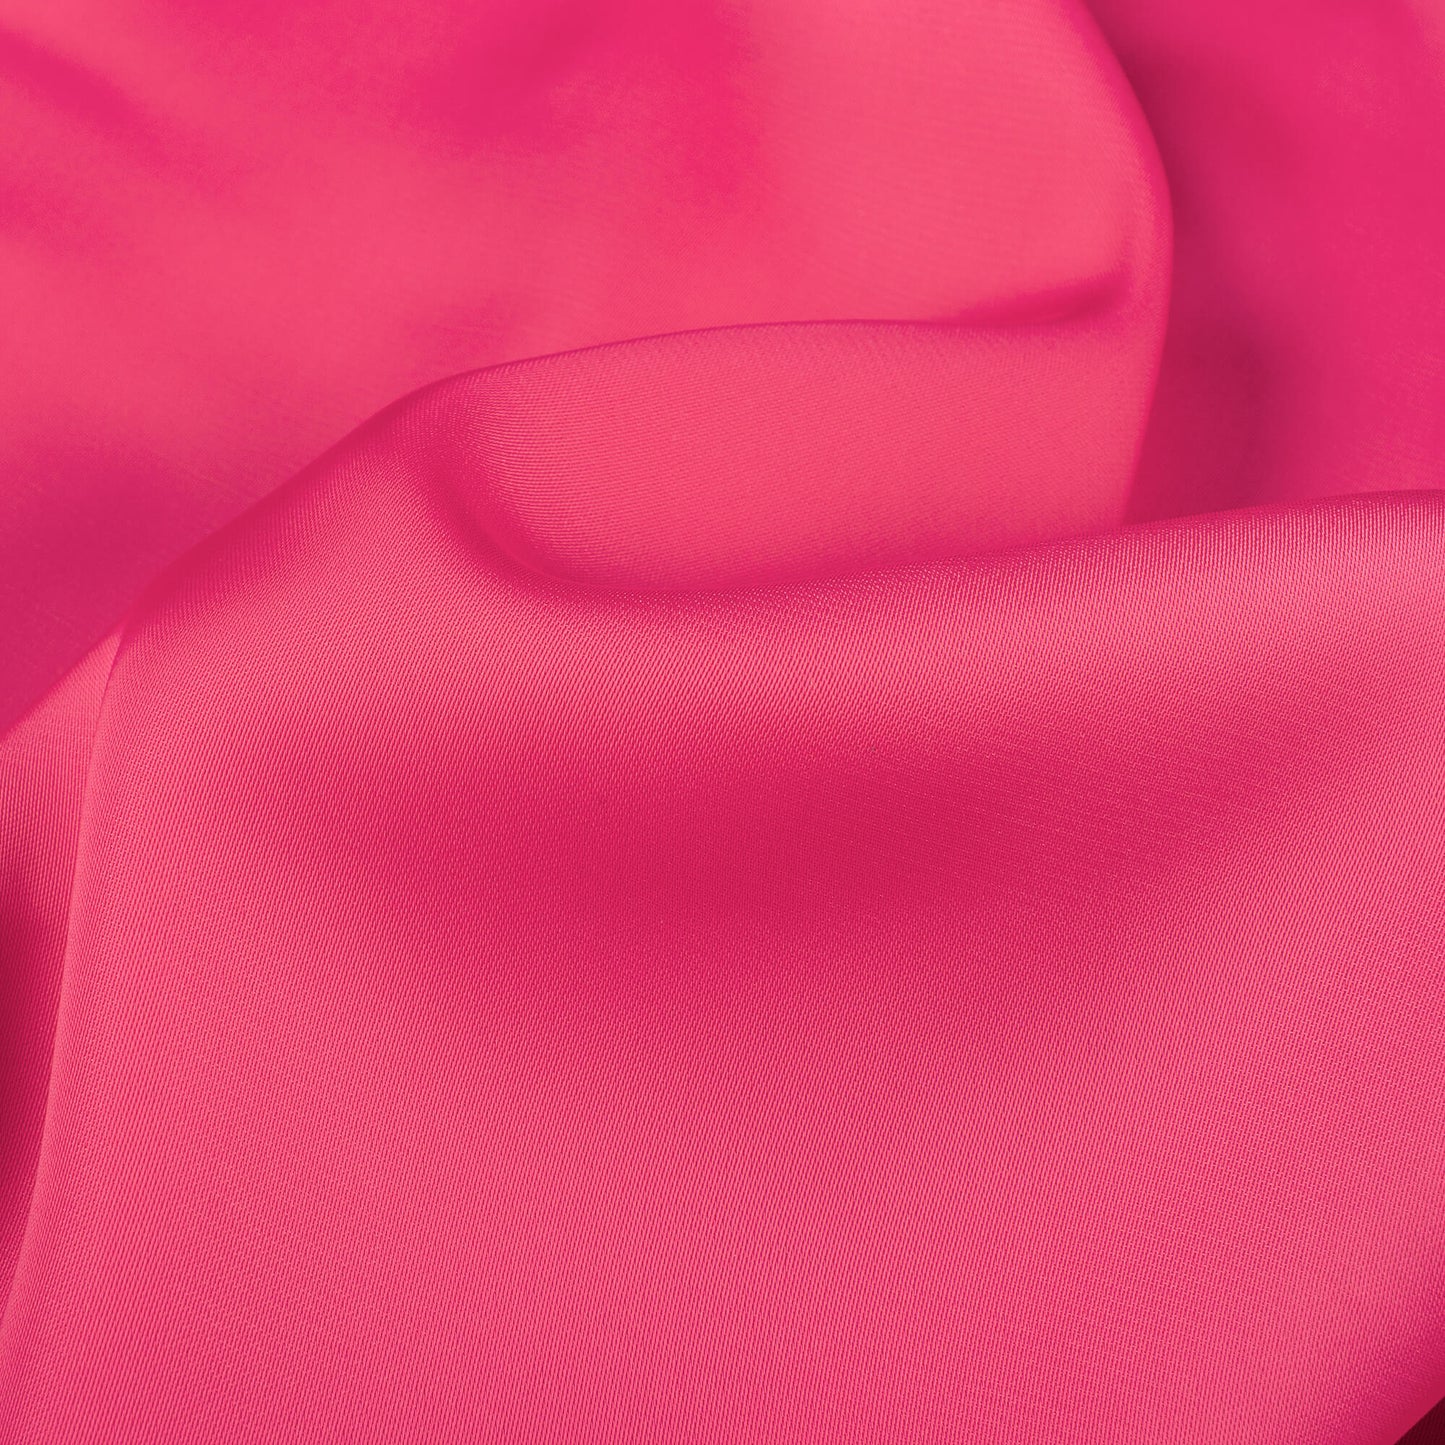 Punch Pink Plain Imported Satin Fabric